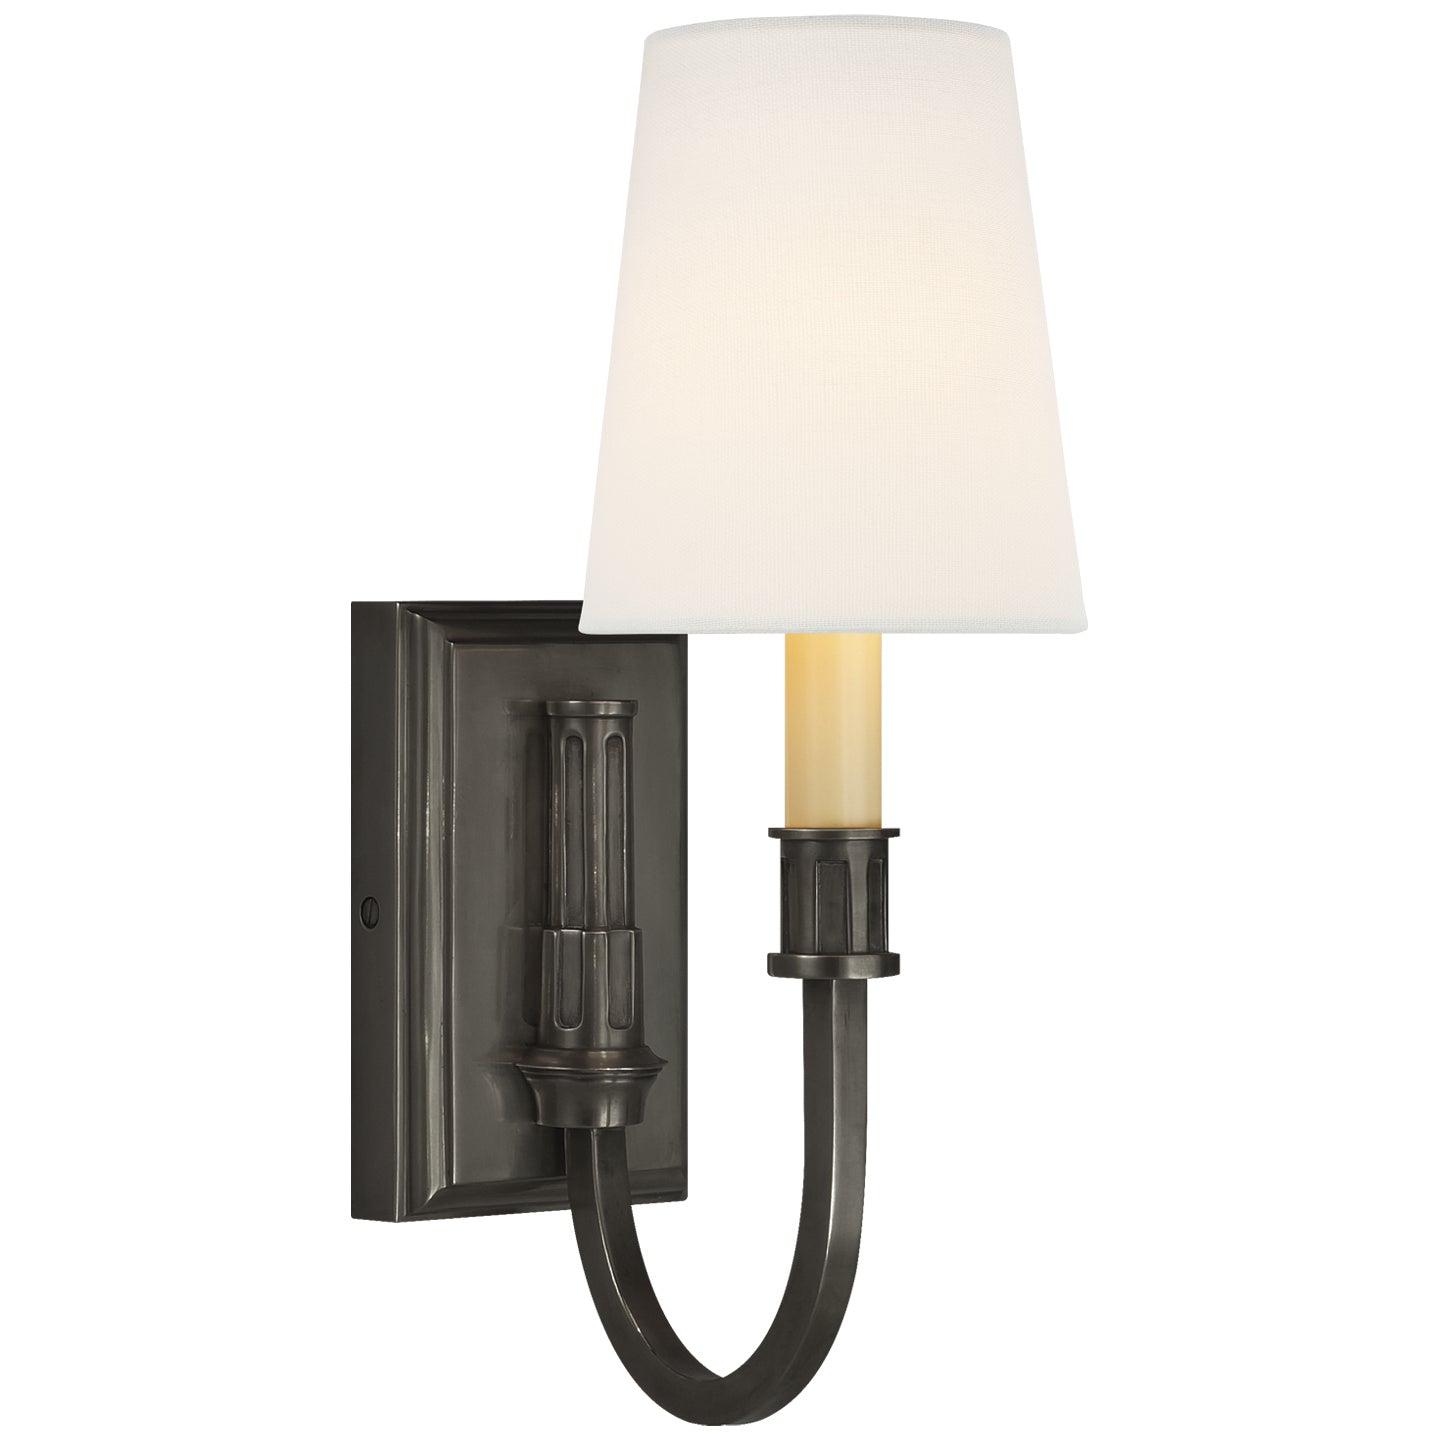 Visual Comfort Signature - TOB 2327BZ-L - One Light Wall Sconce - Modern Library - Bronze